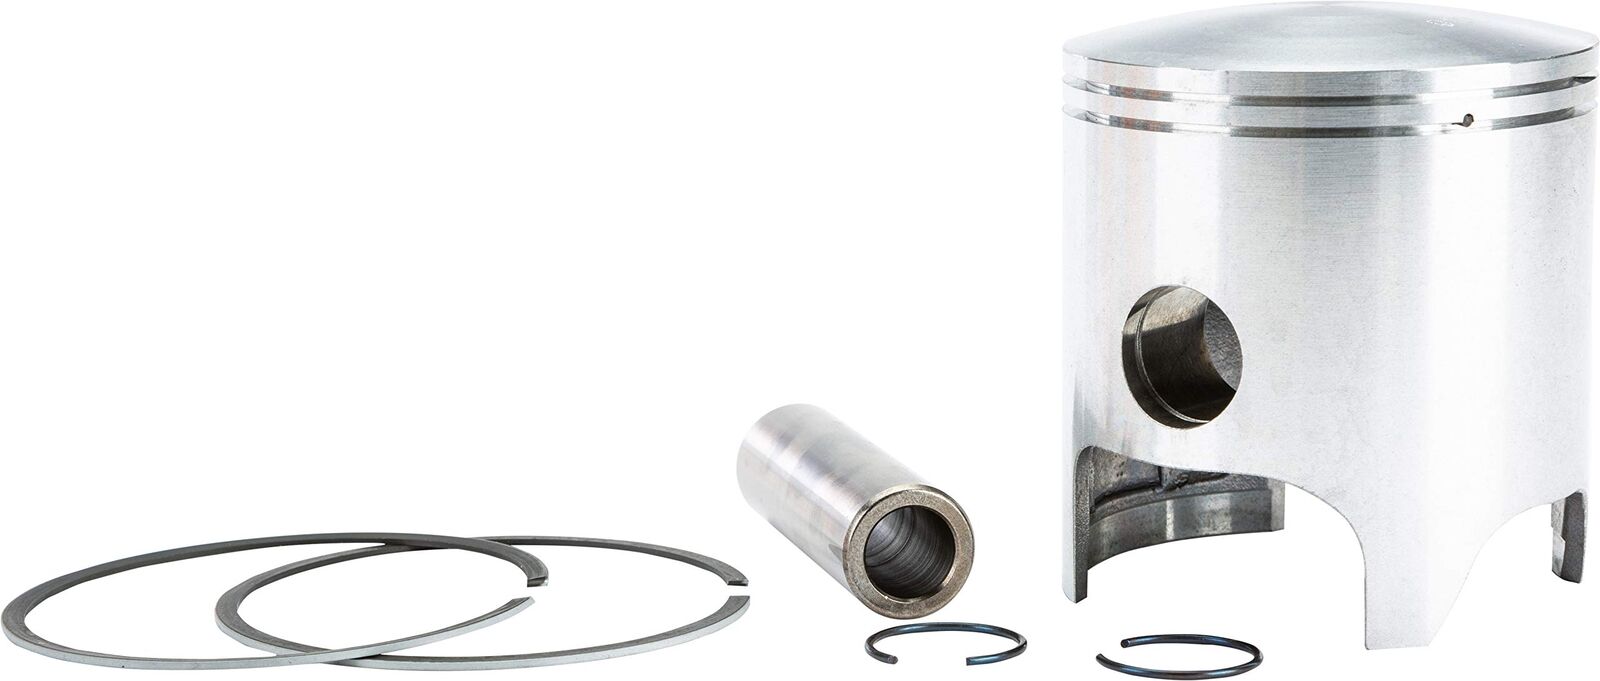 Sp1 Oem Style Piston Kit 0.25Mm Oversize To 68.25Mm 09-806-01N